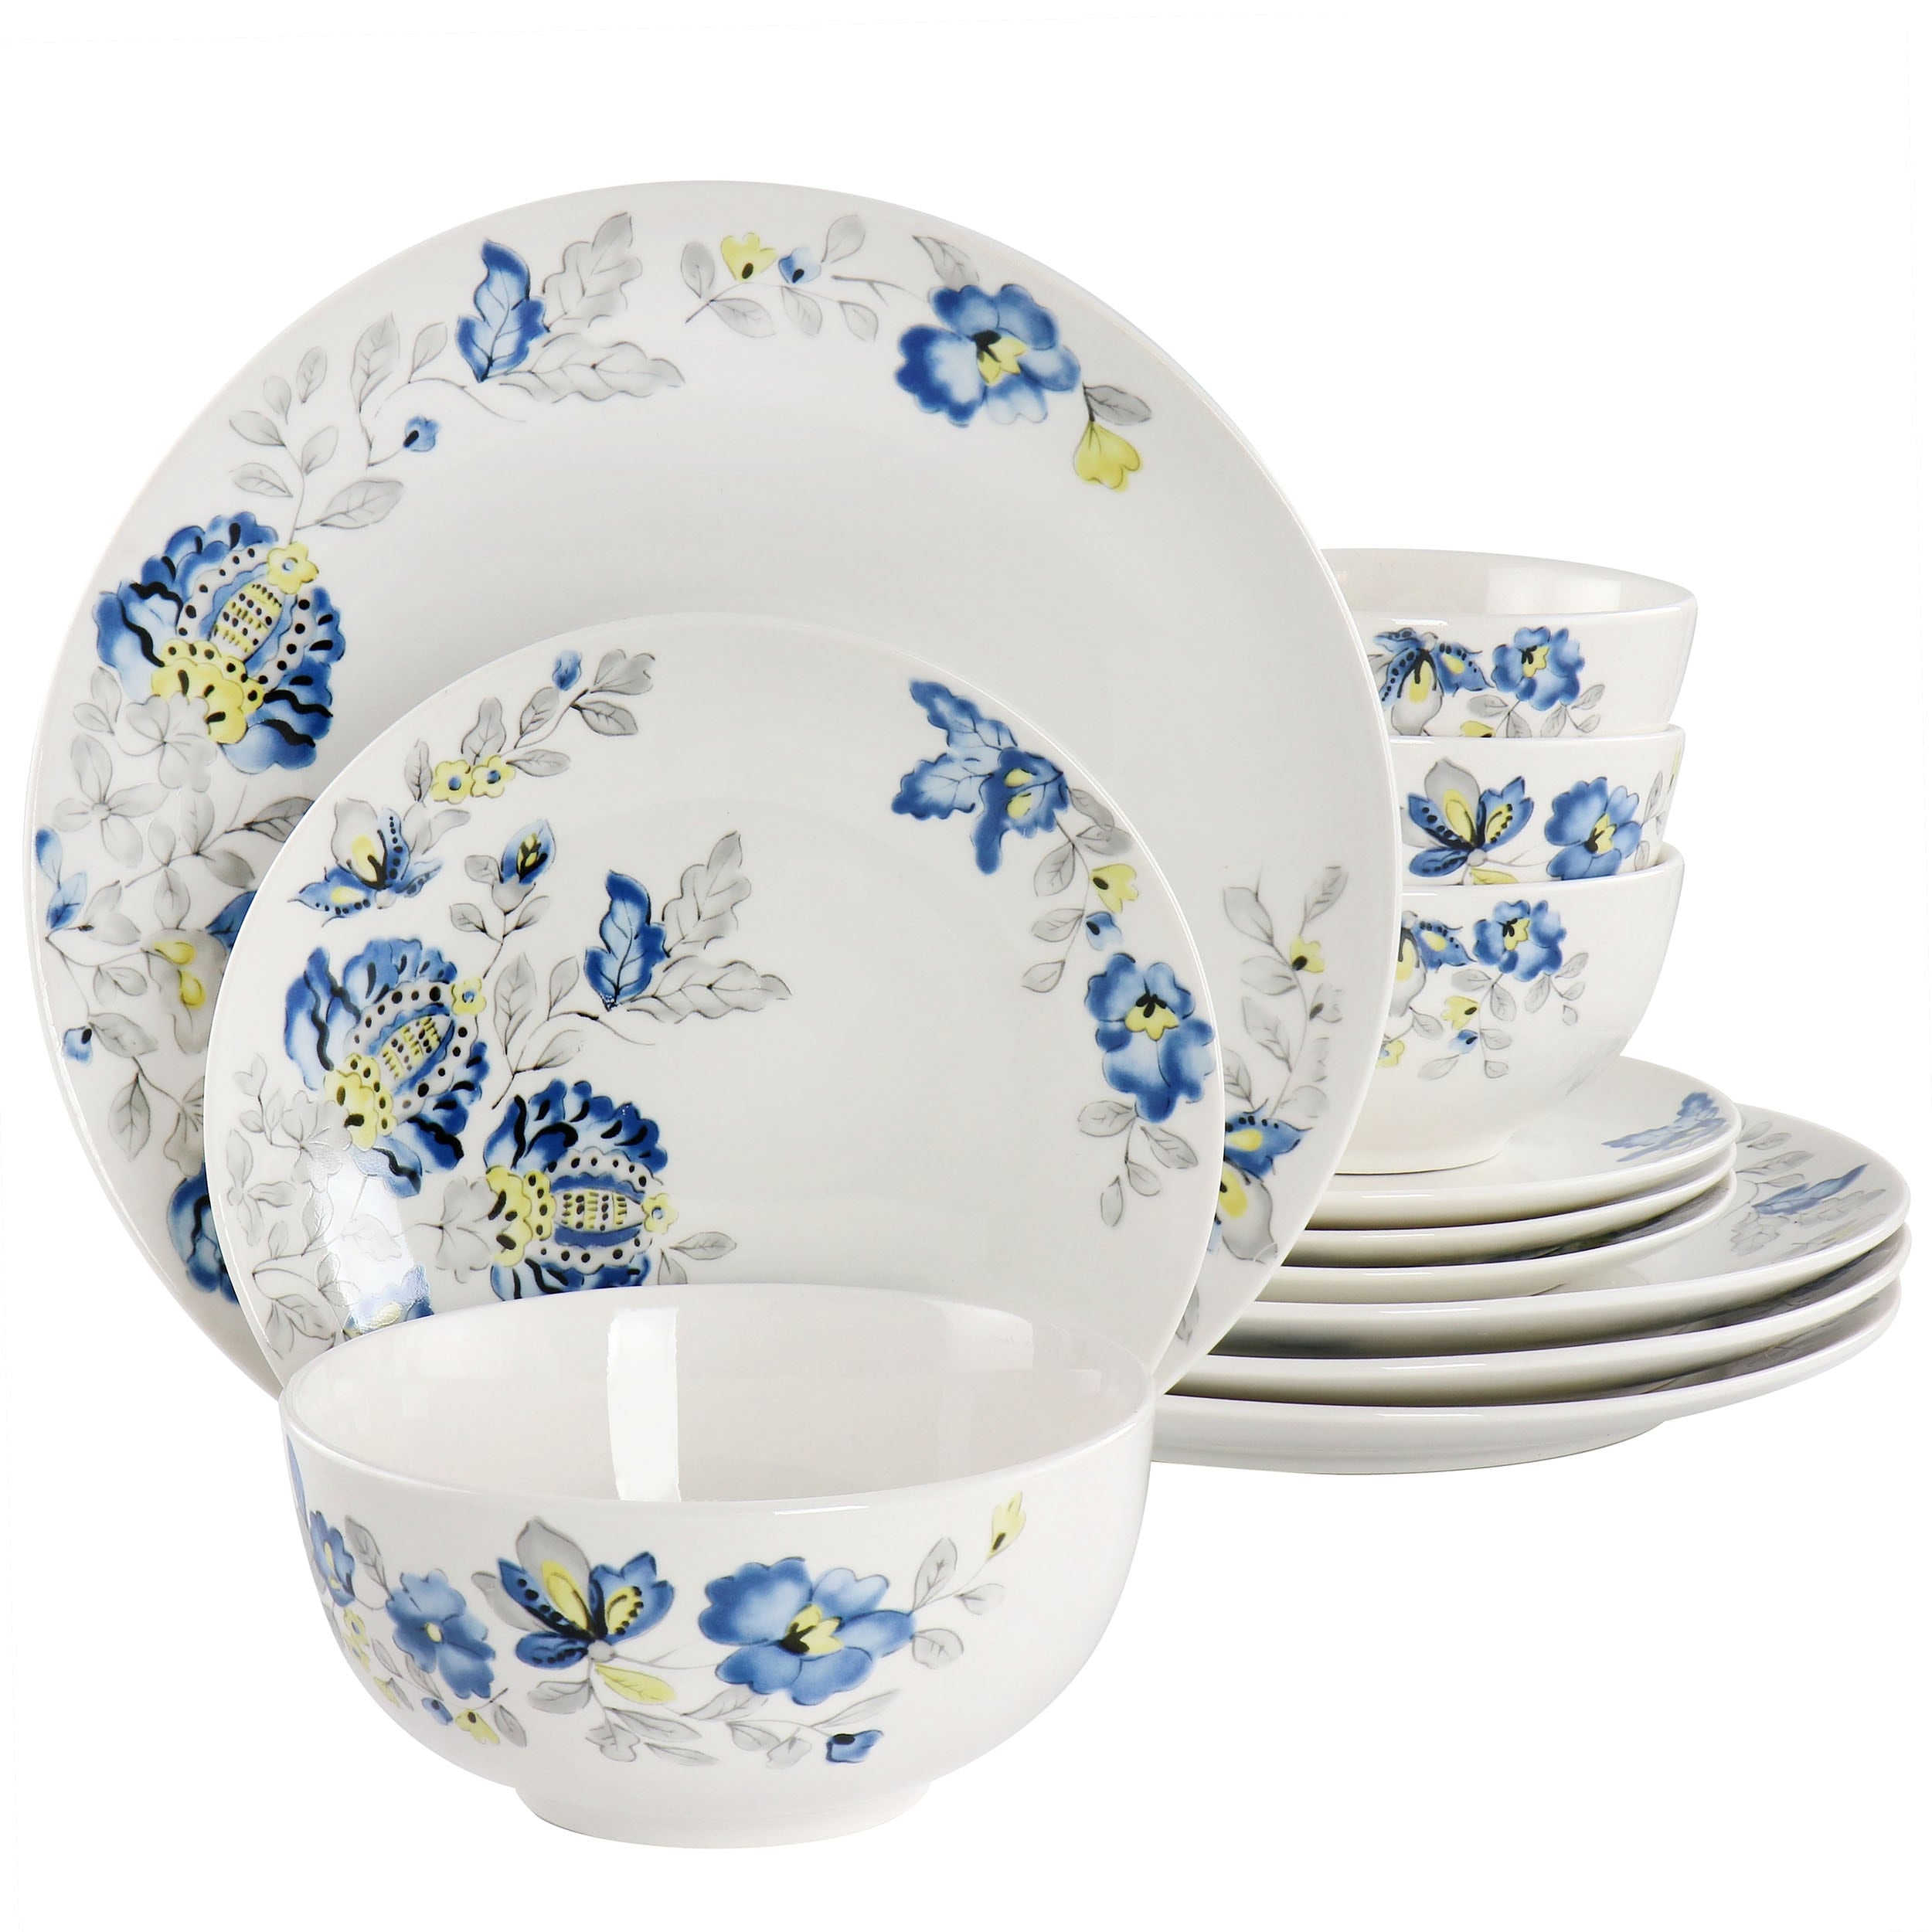 Gibson Our Table Simply White Fine Ceramic 6 Piece Square Cup and Saucer  Set in White